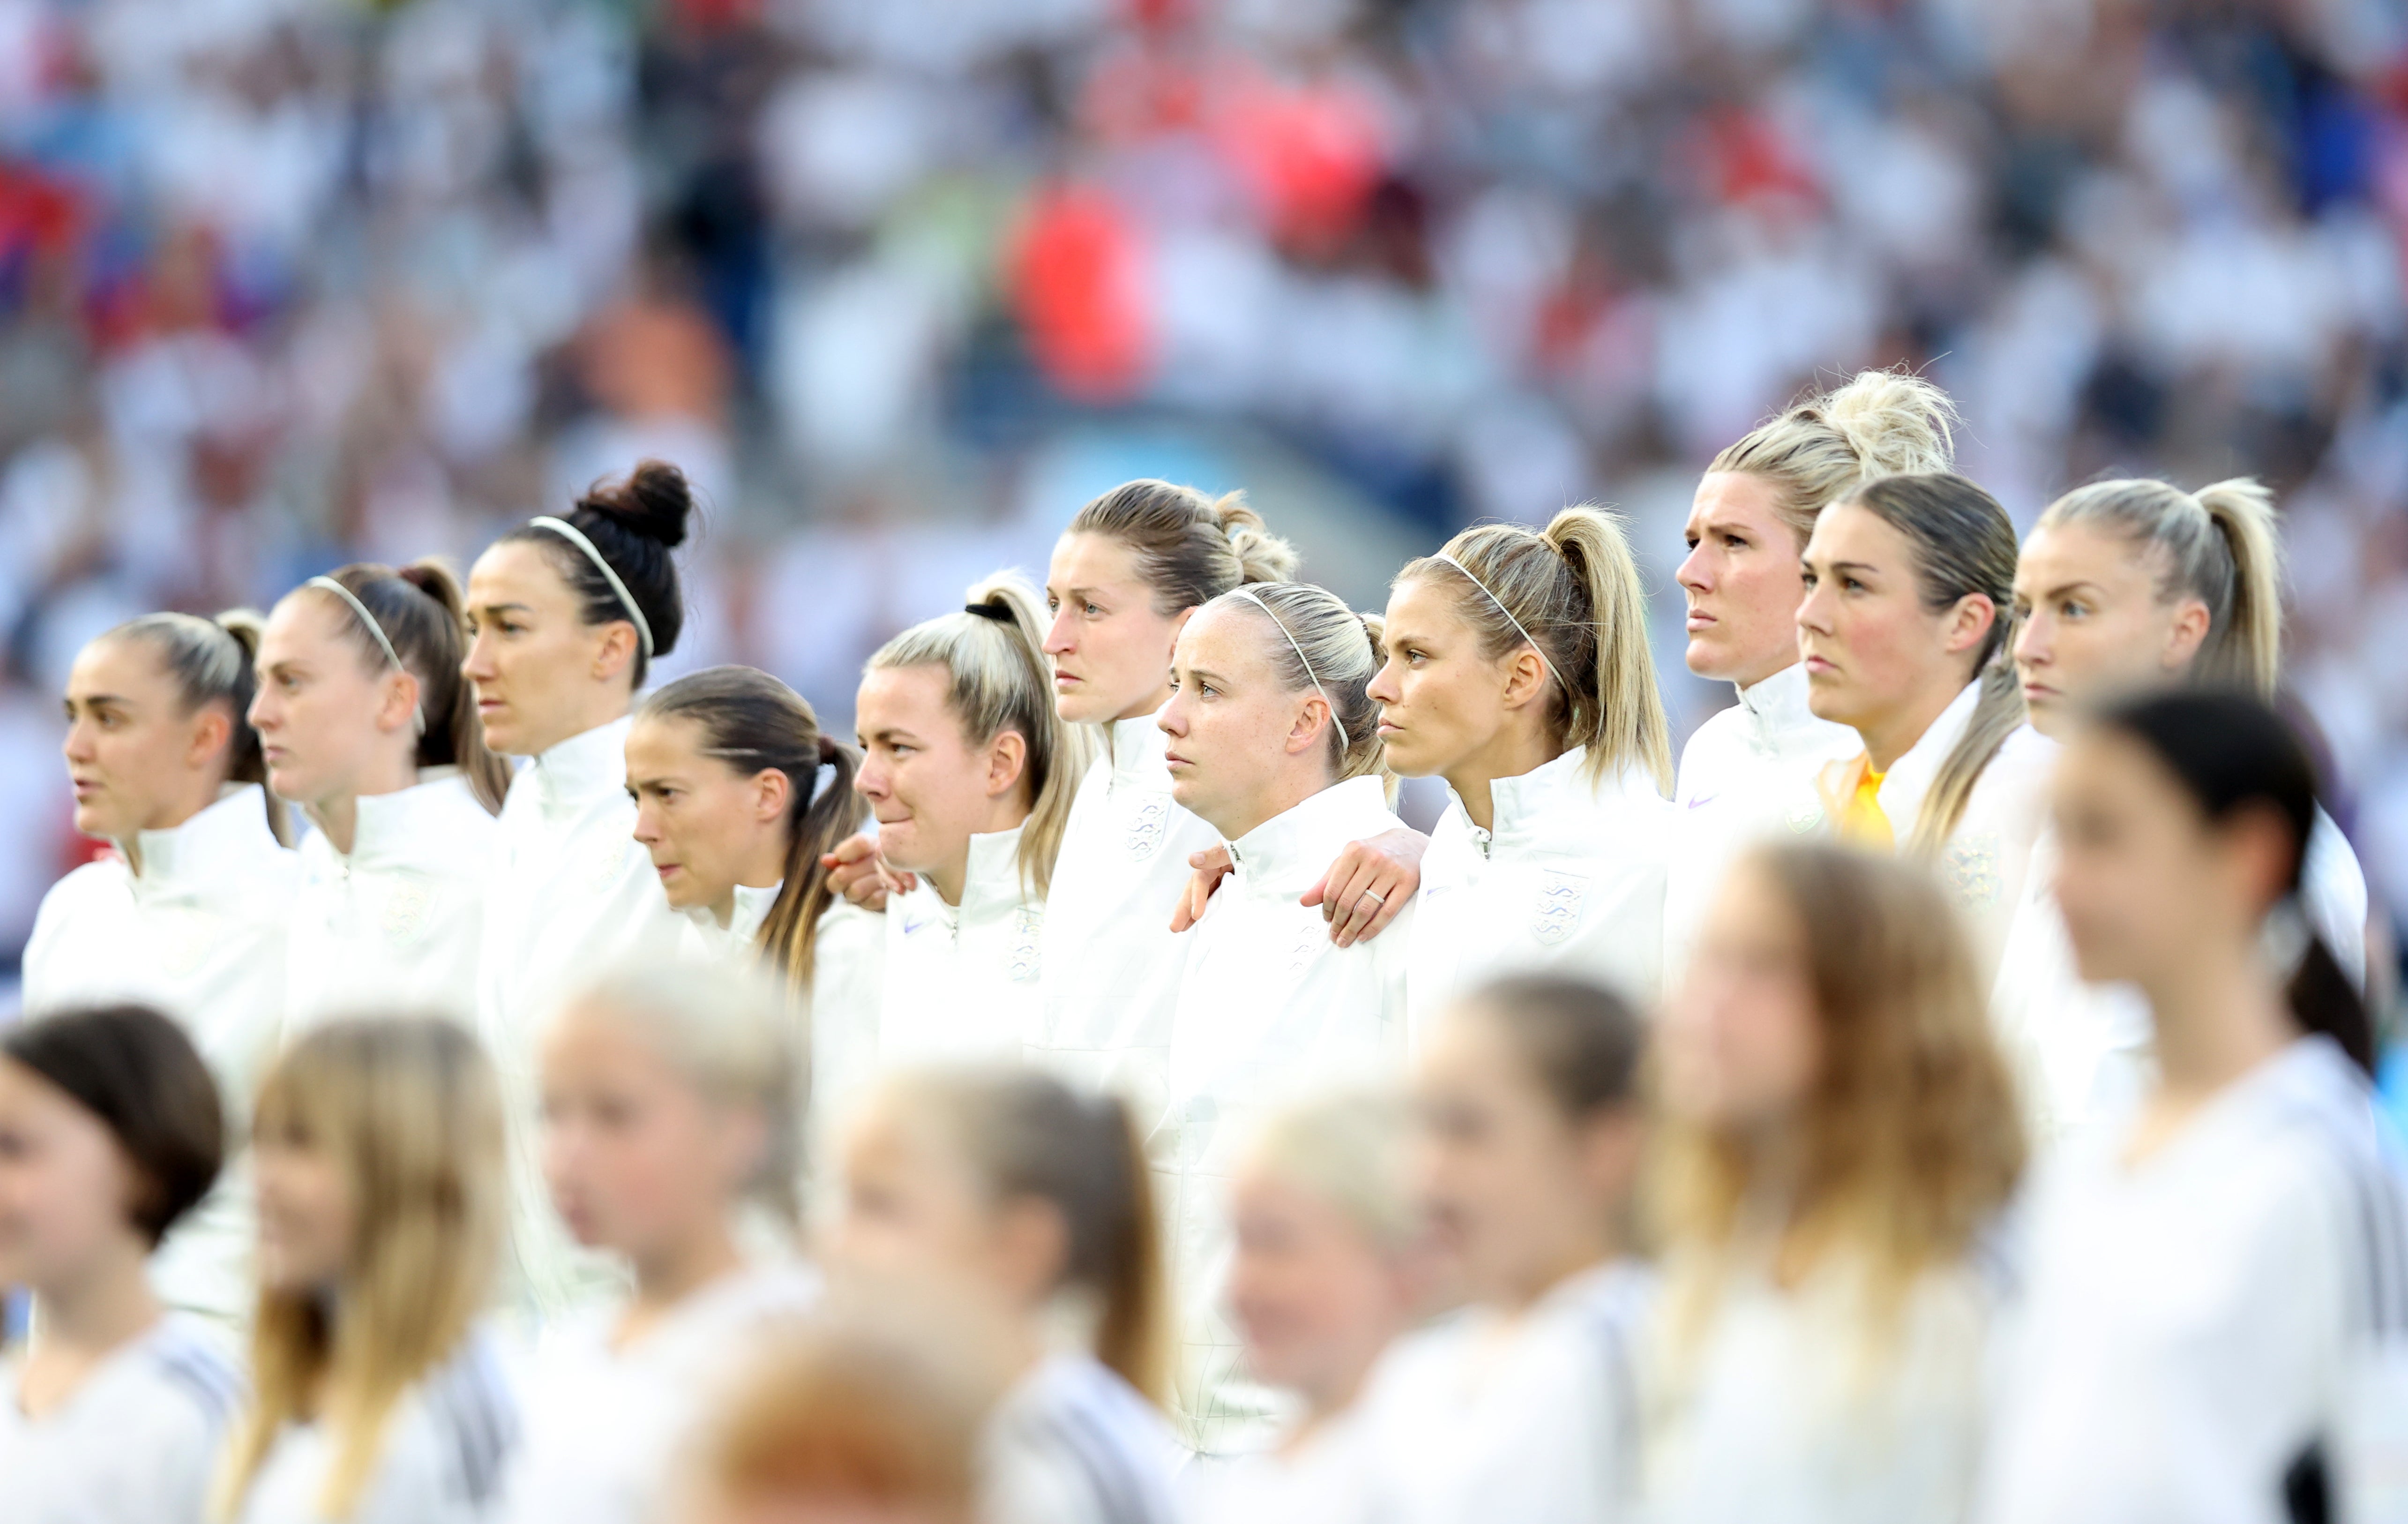 Hopefully, England’s triumph will win over doubters who grumble that the women’s game is inferior to the men’s